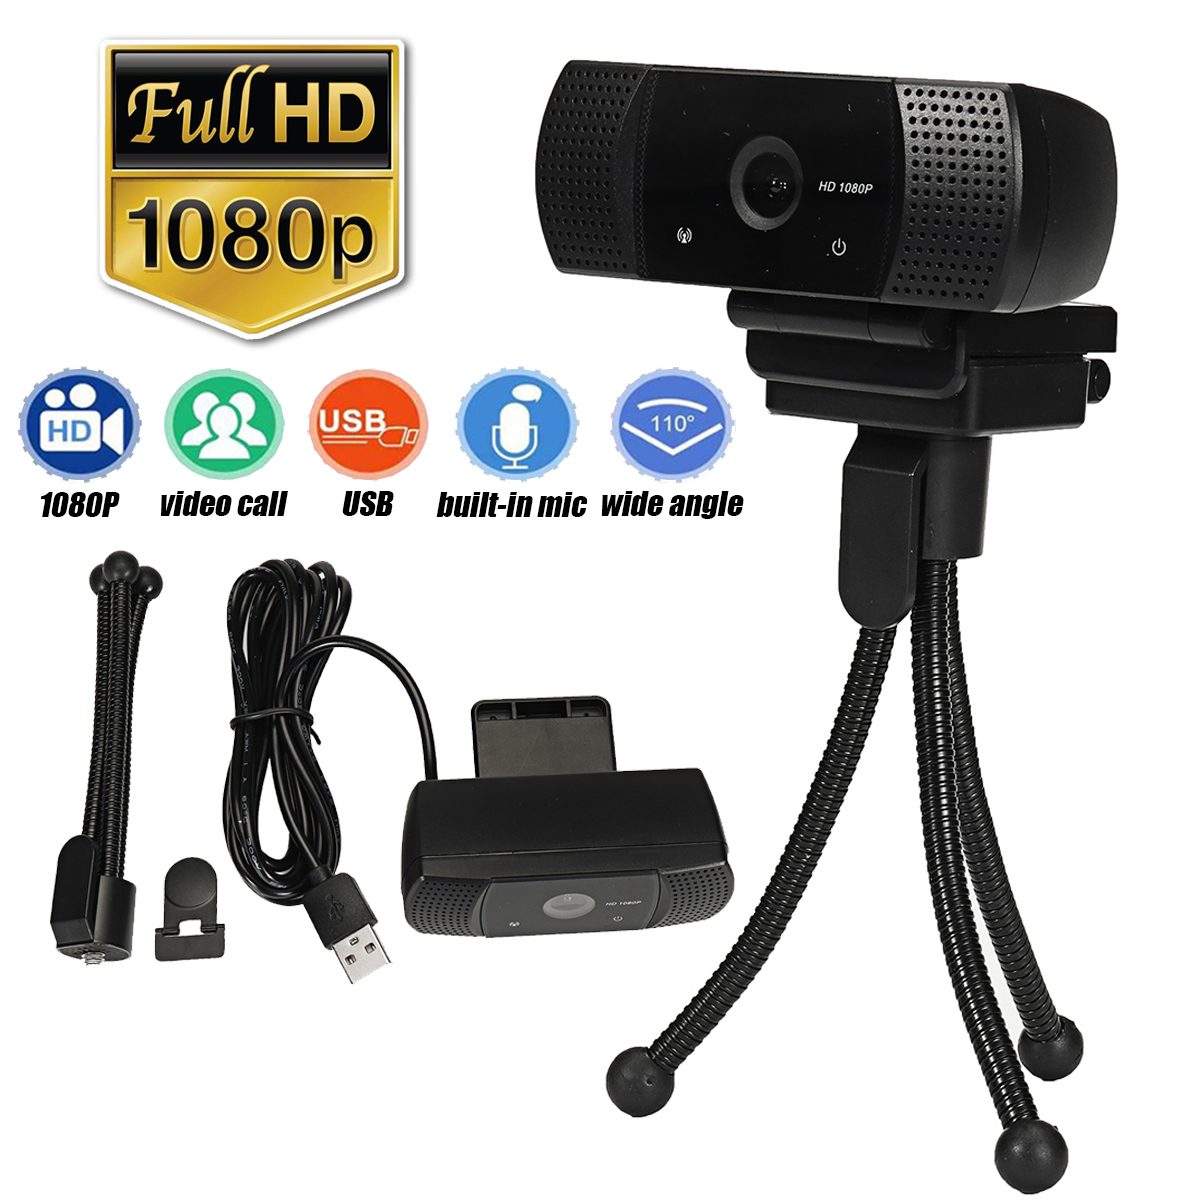 1080P-USB-Webcams-PC-Laptop-Video-Computer-Camera-Built-in-Microphone-Drive-Free-1771465-1